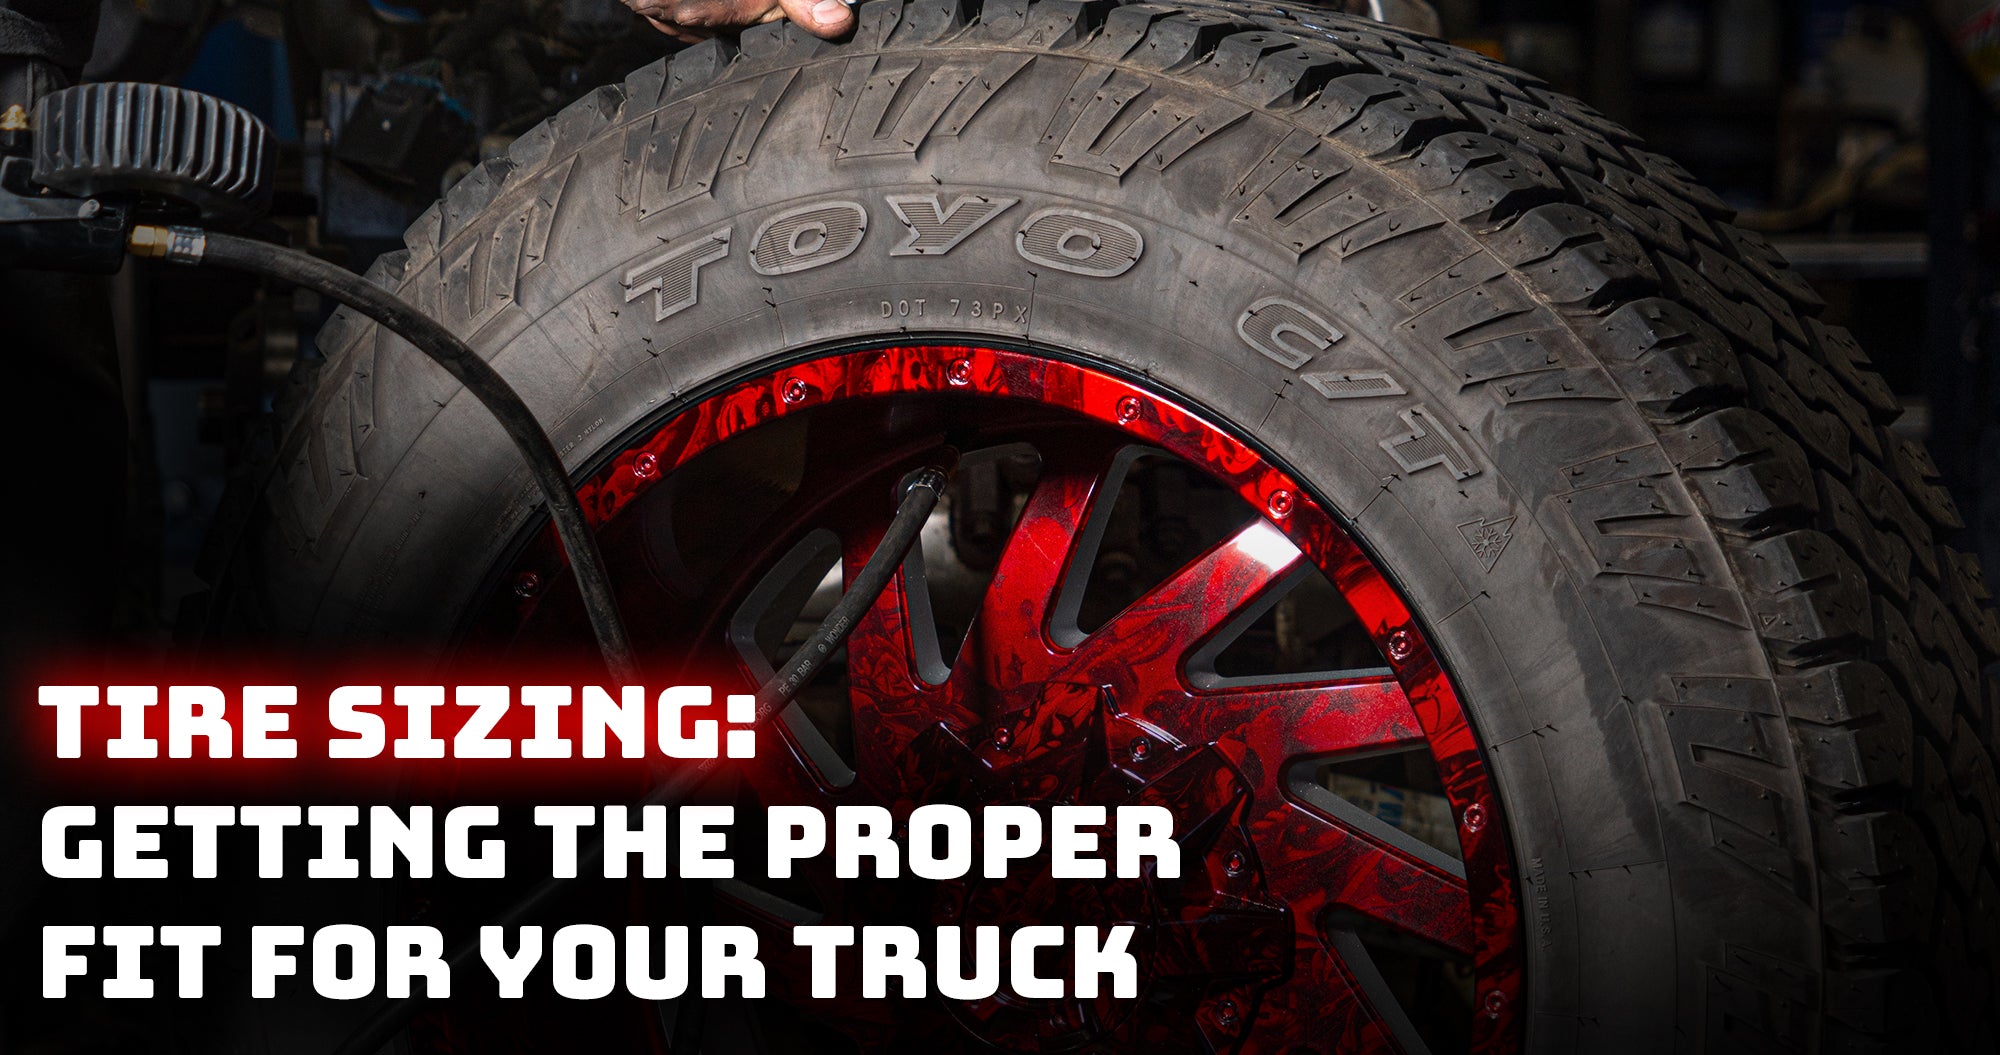 Tire Sizing: Getting the Proper fit for your truck